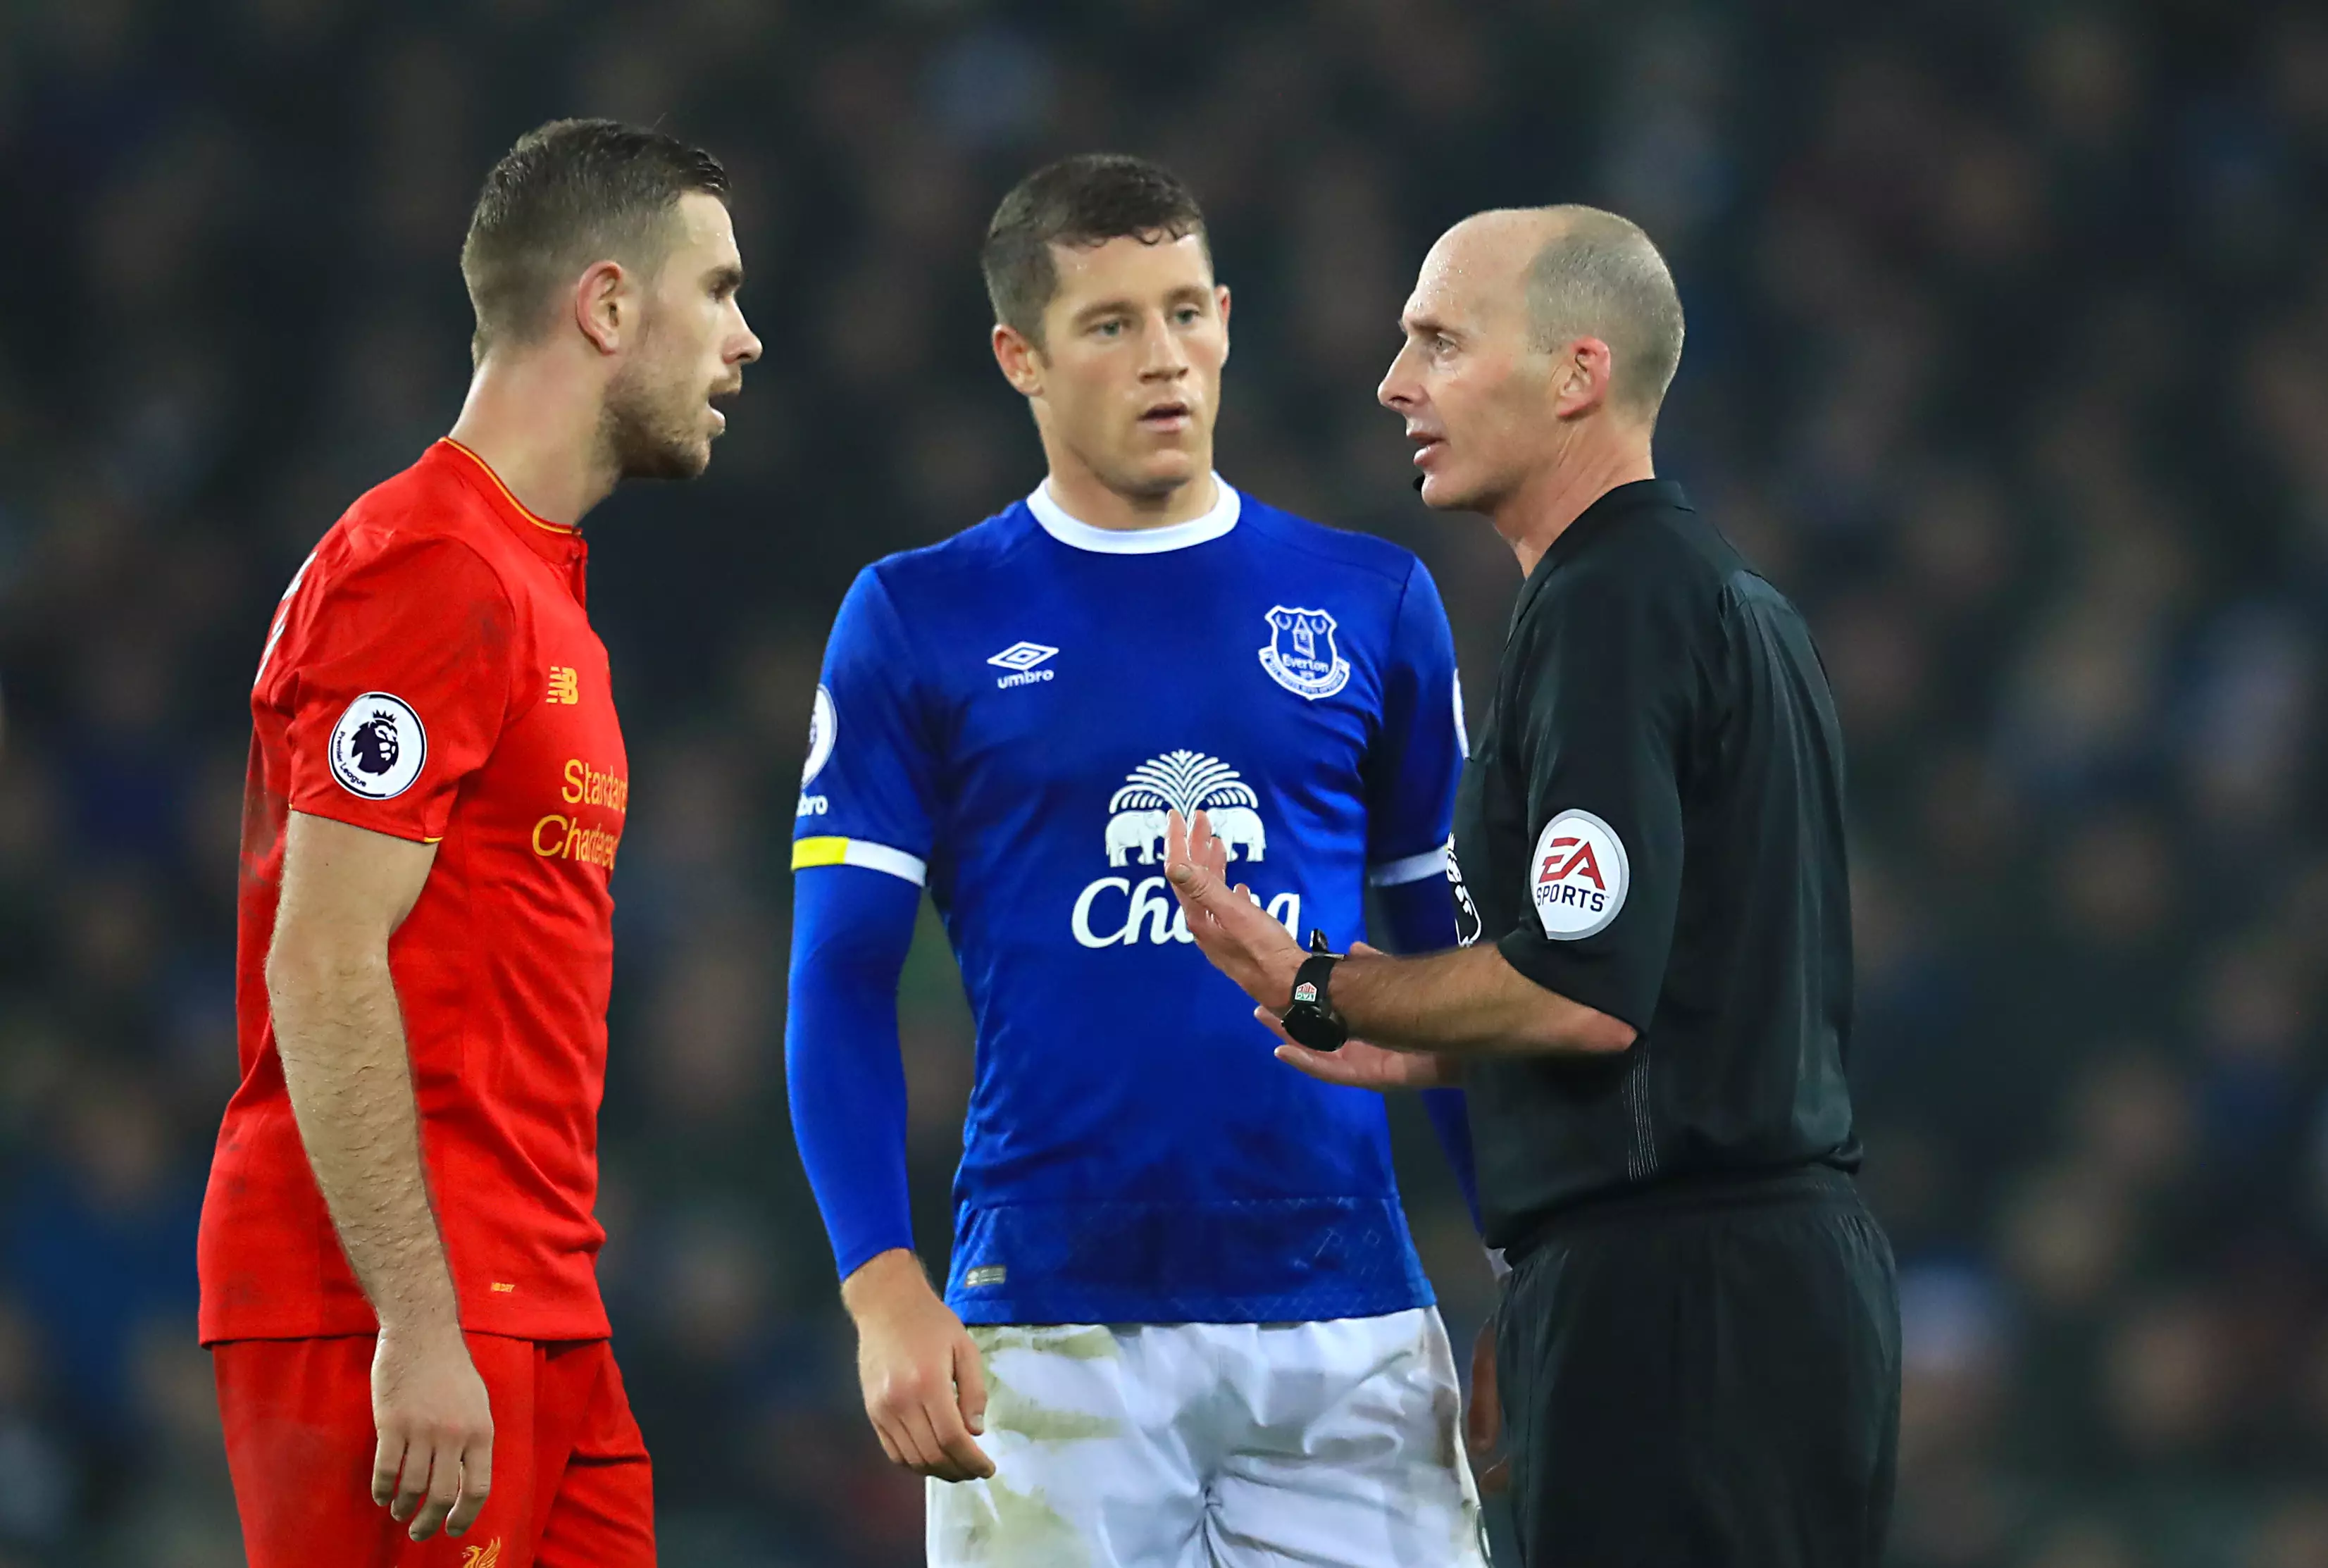 WATCH: Mike Dean's 'No Look' Yellow Card Is Truly Majestic